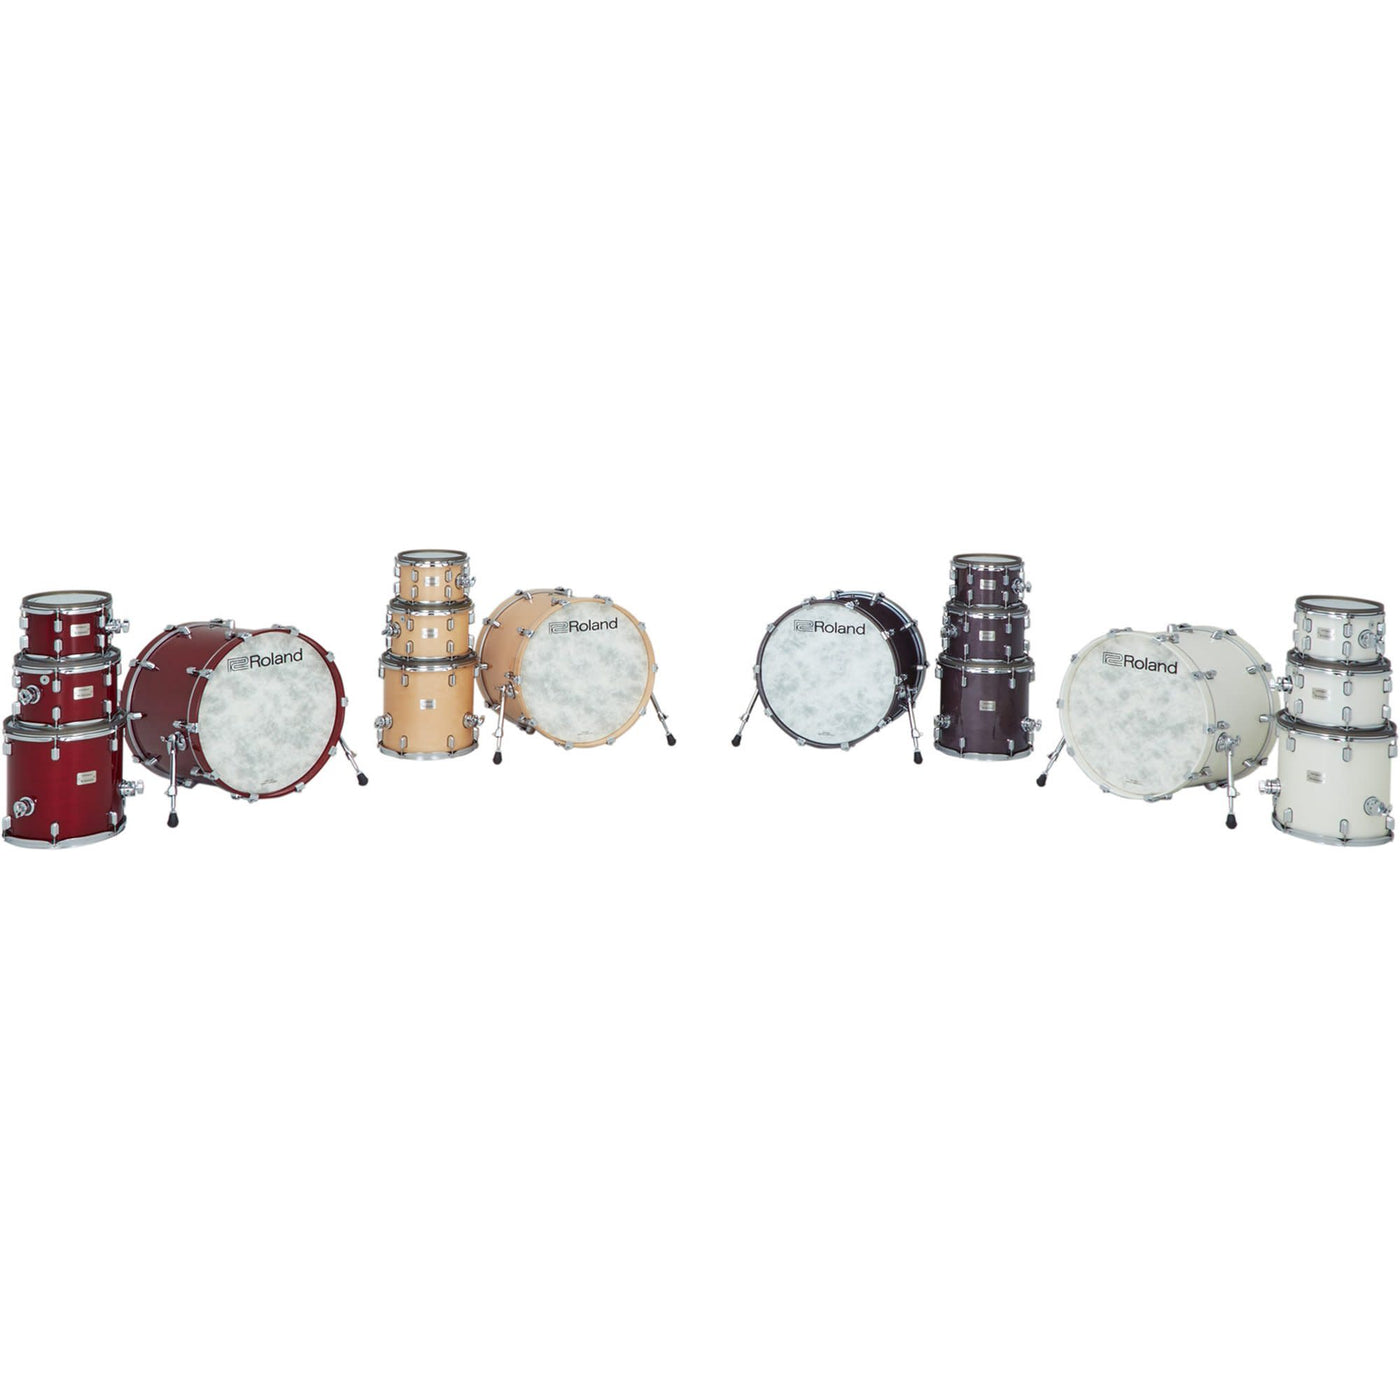 Roland VAD706-2PW V-Drums Acoustic Design Electronic Drum Set - Pearl White Finish